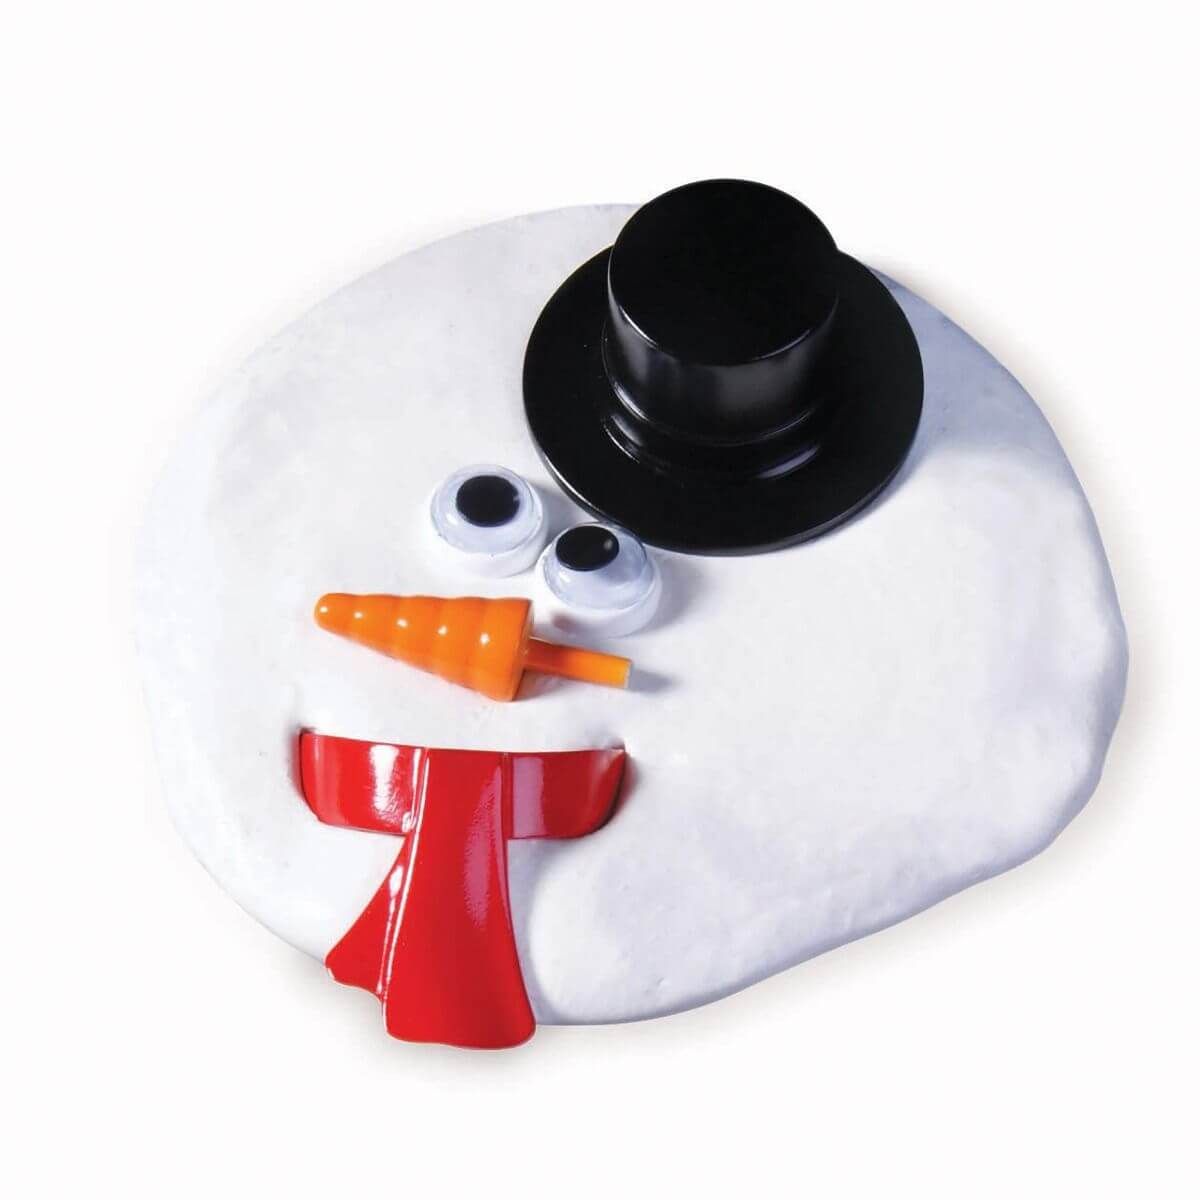 Frosty the Melting Snowman fully melted!